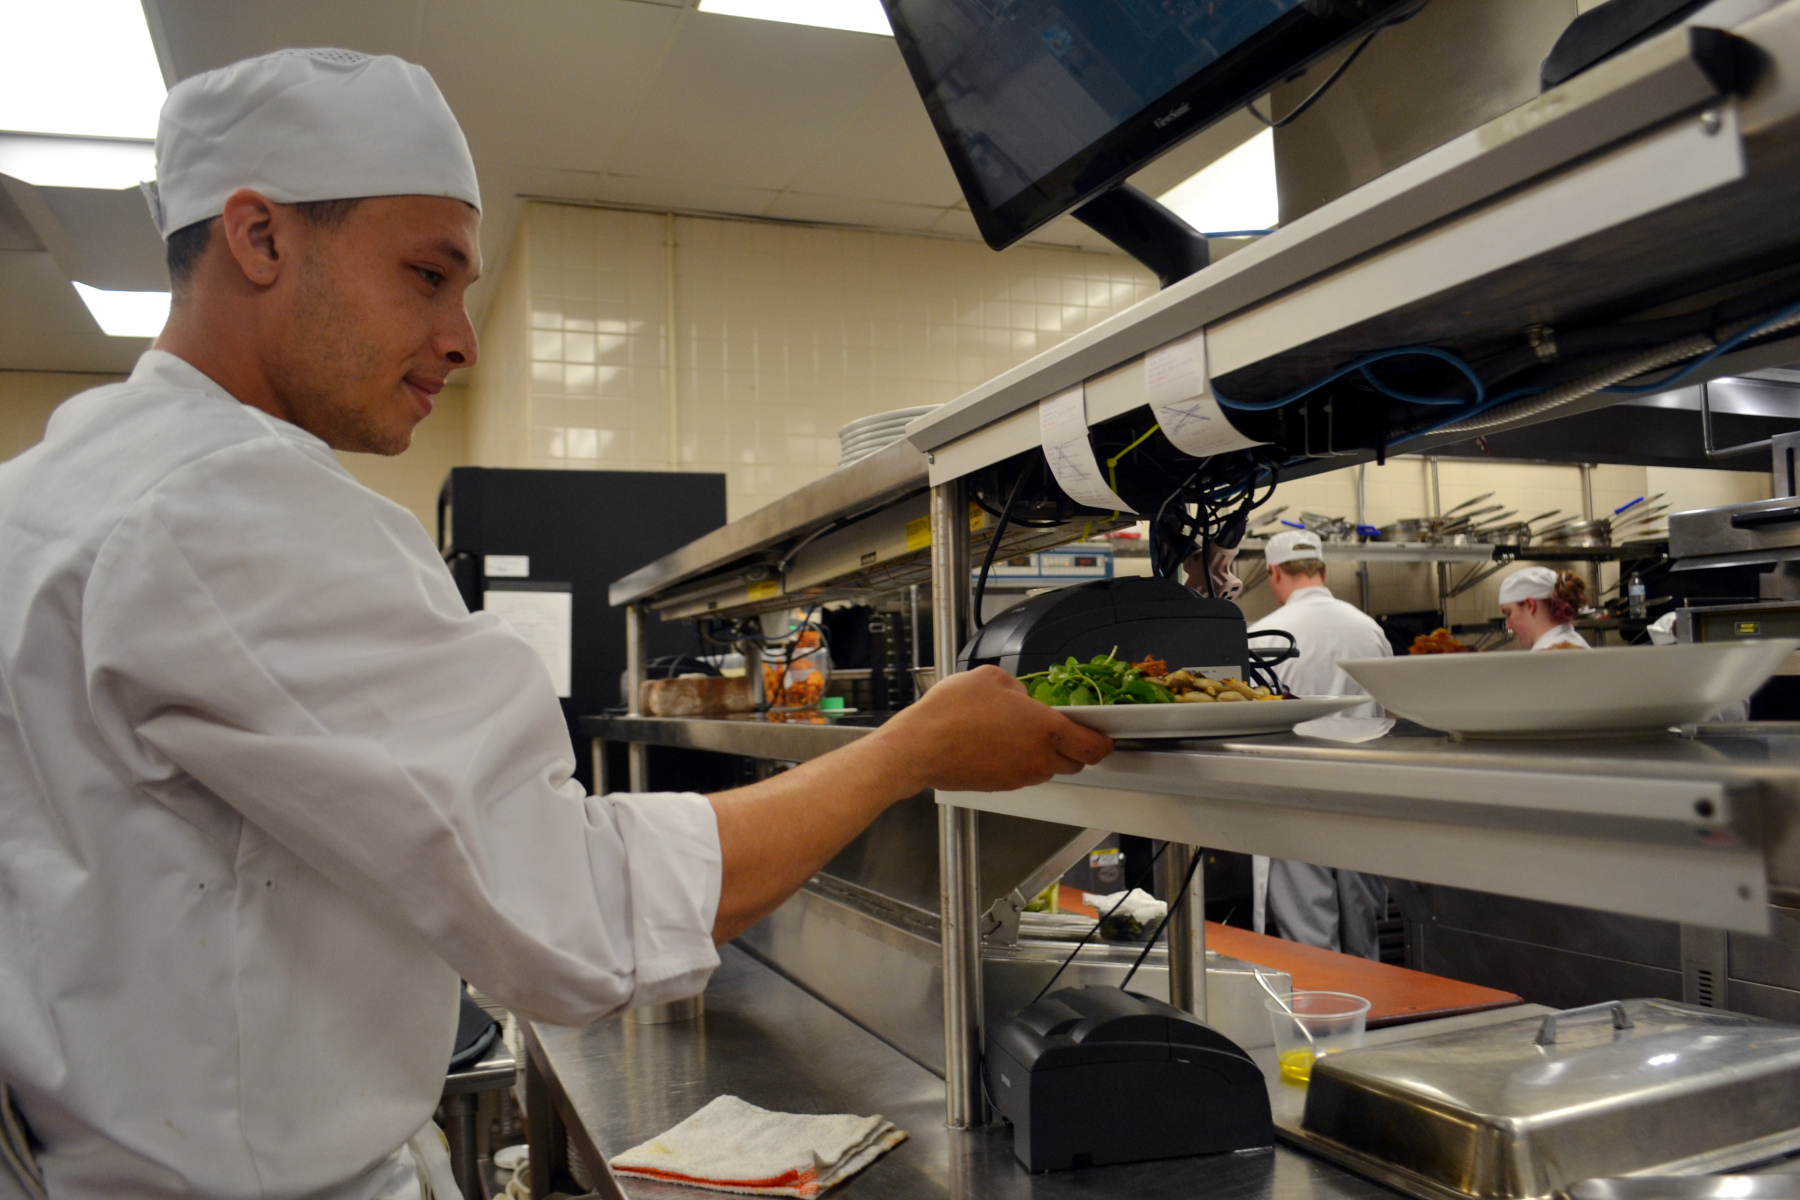 Christian Dobert in Culinary Arts Lab reaching for plate